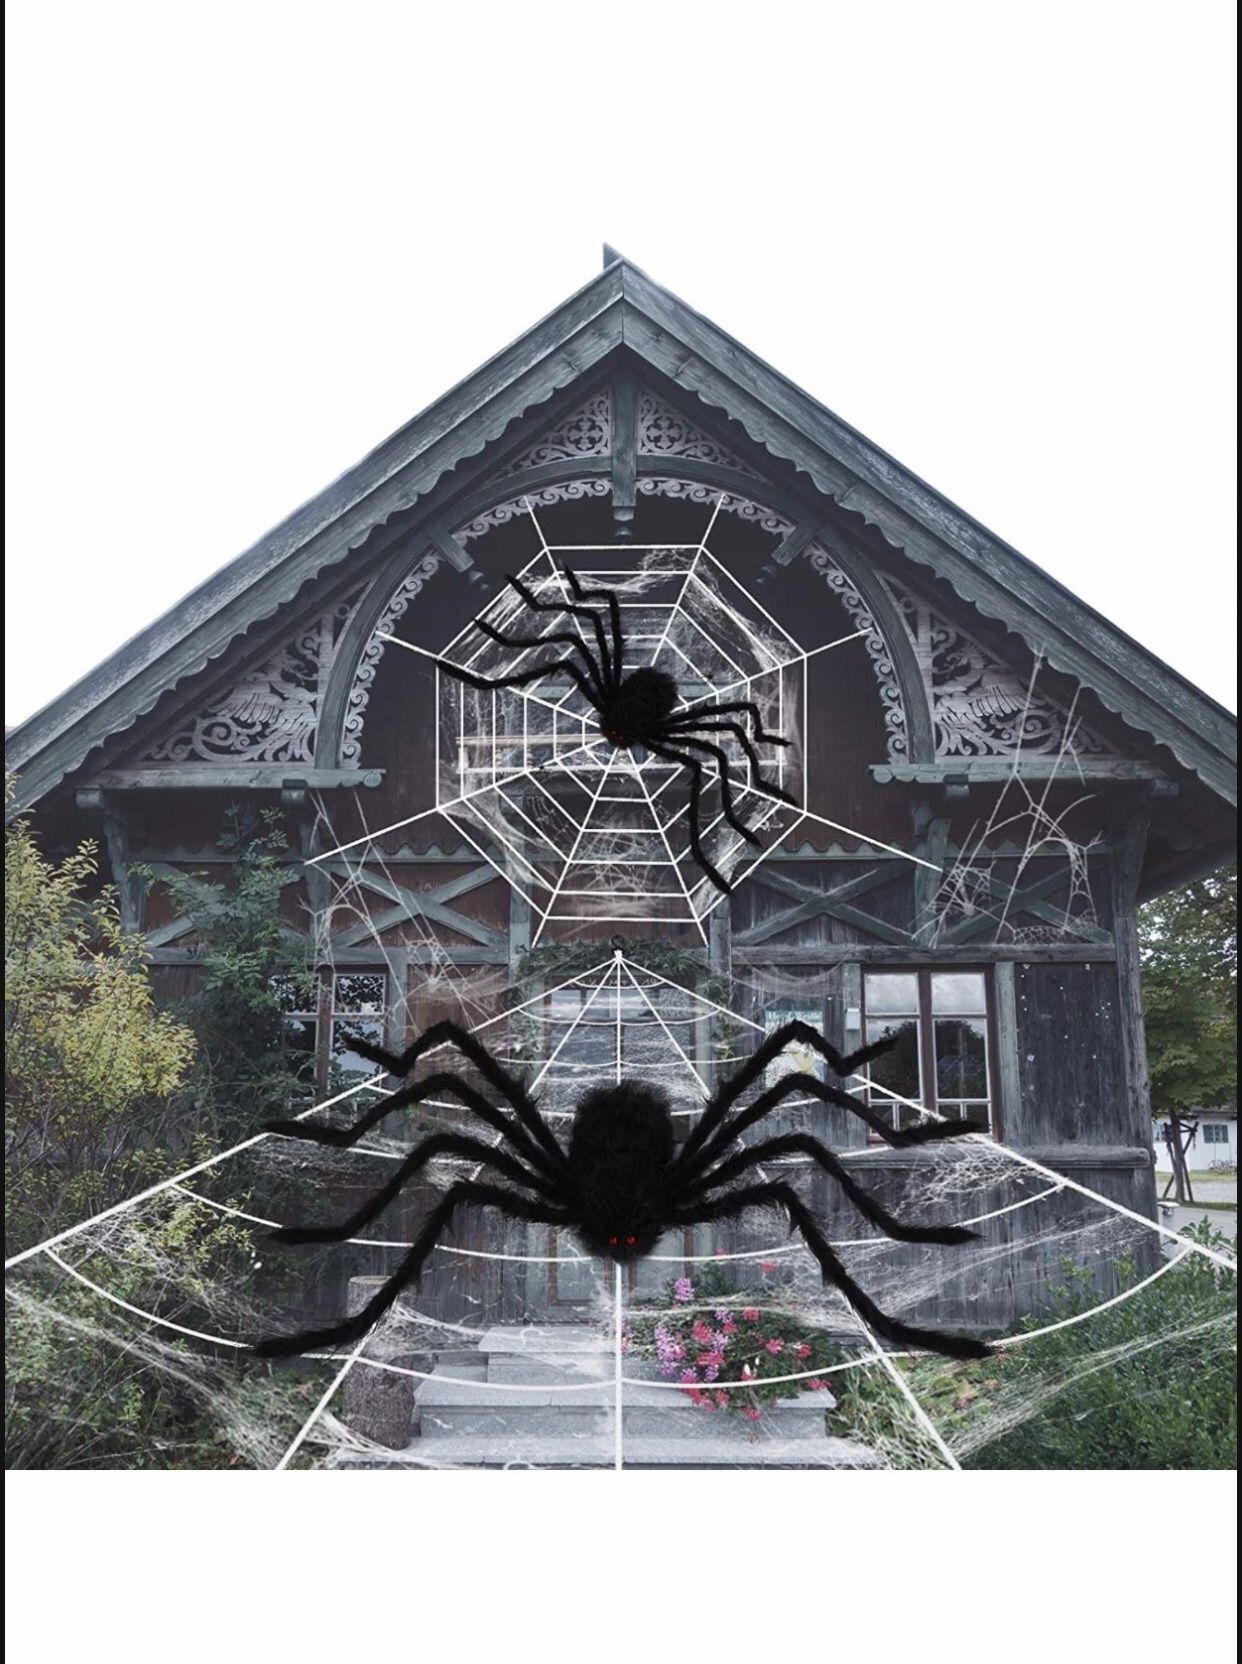 Halloween Decorations, 2 Scary Spiders and 2 Giant Spider Web with Super Stretch Cobweb, Used for Doors, Indoor and Outdoor Halloween Decor Yard Home 